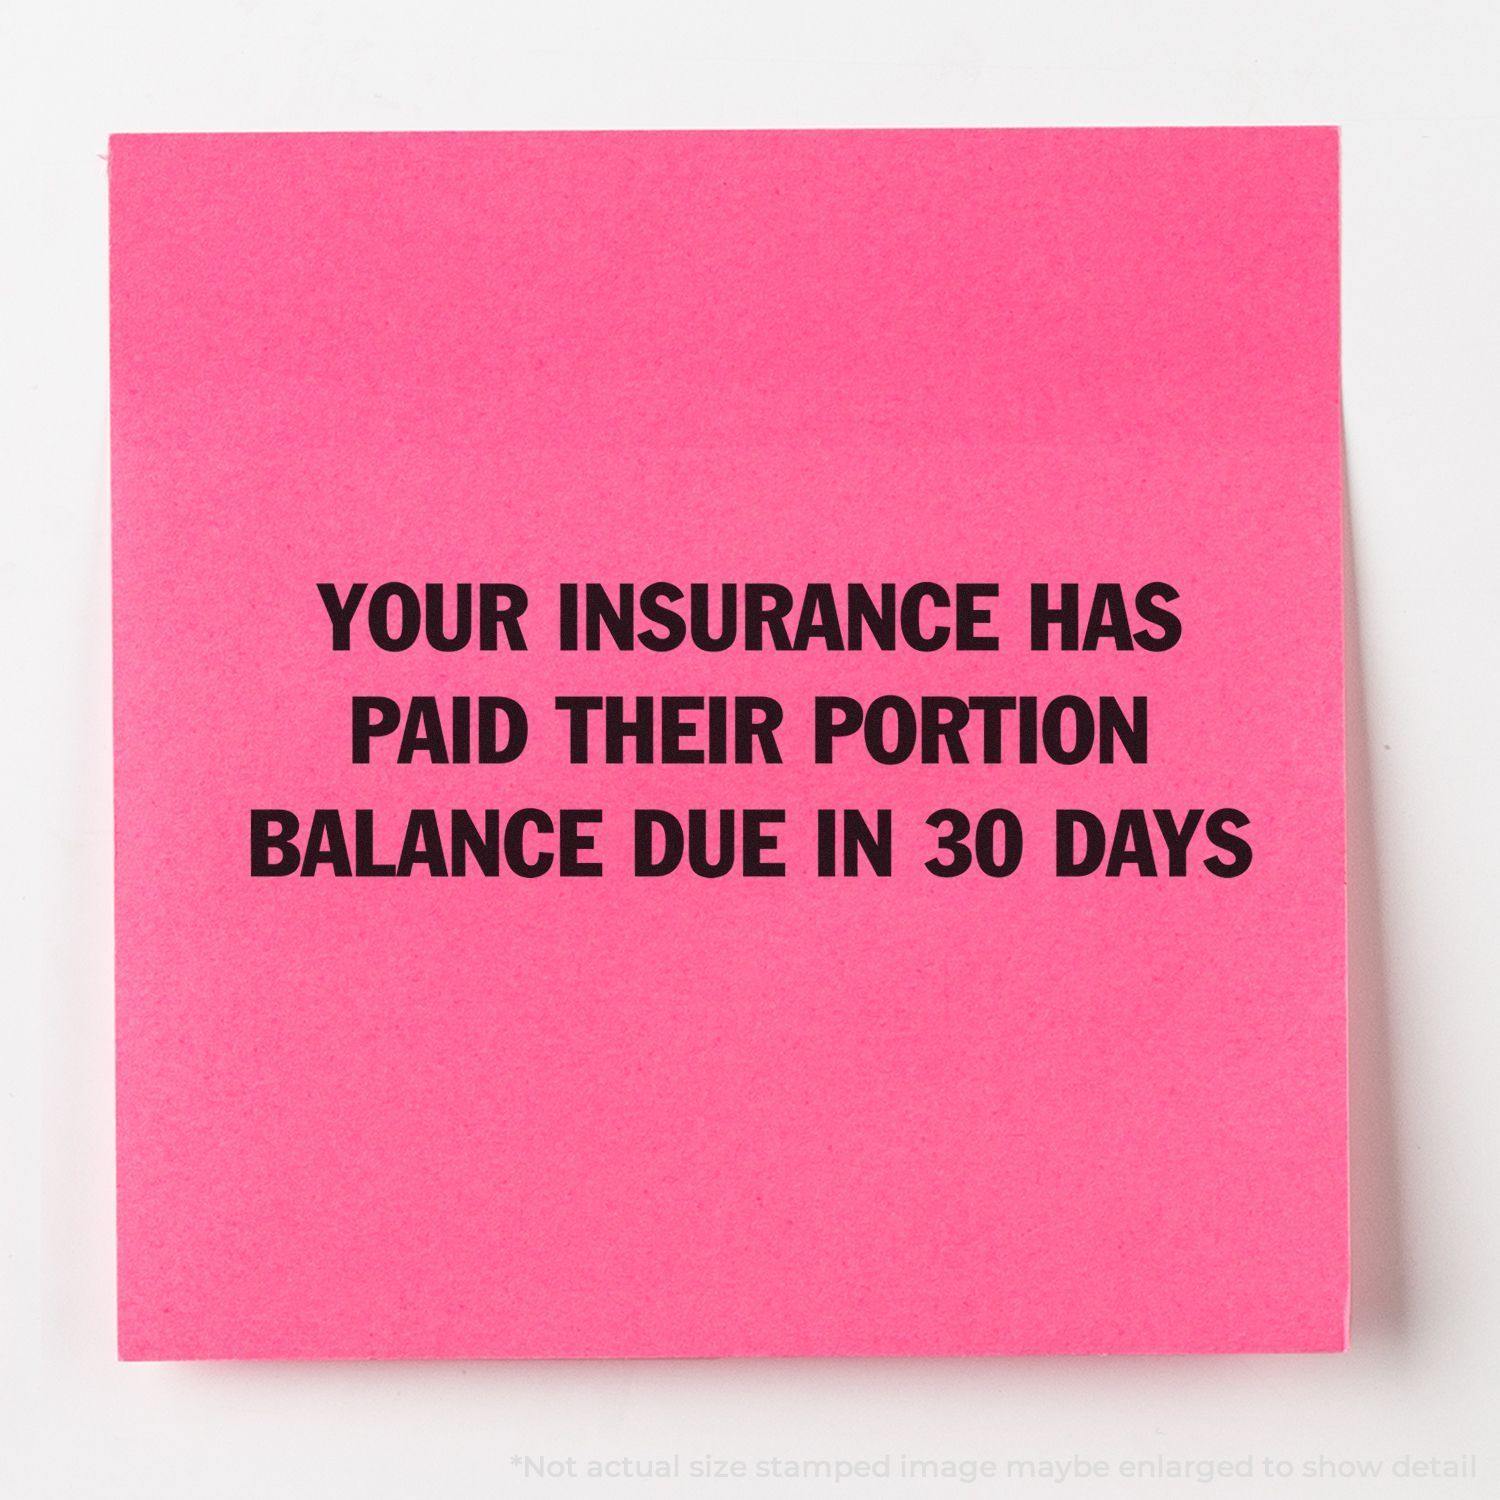 A stock office rubber stamp with a stamped image showing how the text "YOUR INSURANCE HAS PAID THEIR PORTION" and "BALANCE DUE IN 30 DAYS" in a large font is displayed after stamping.